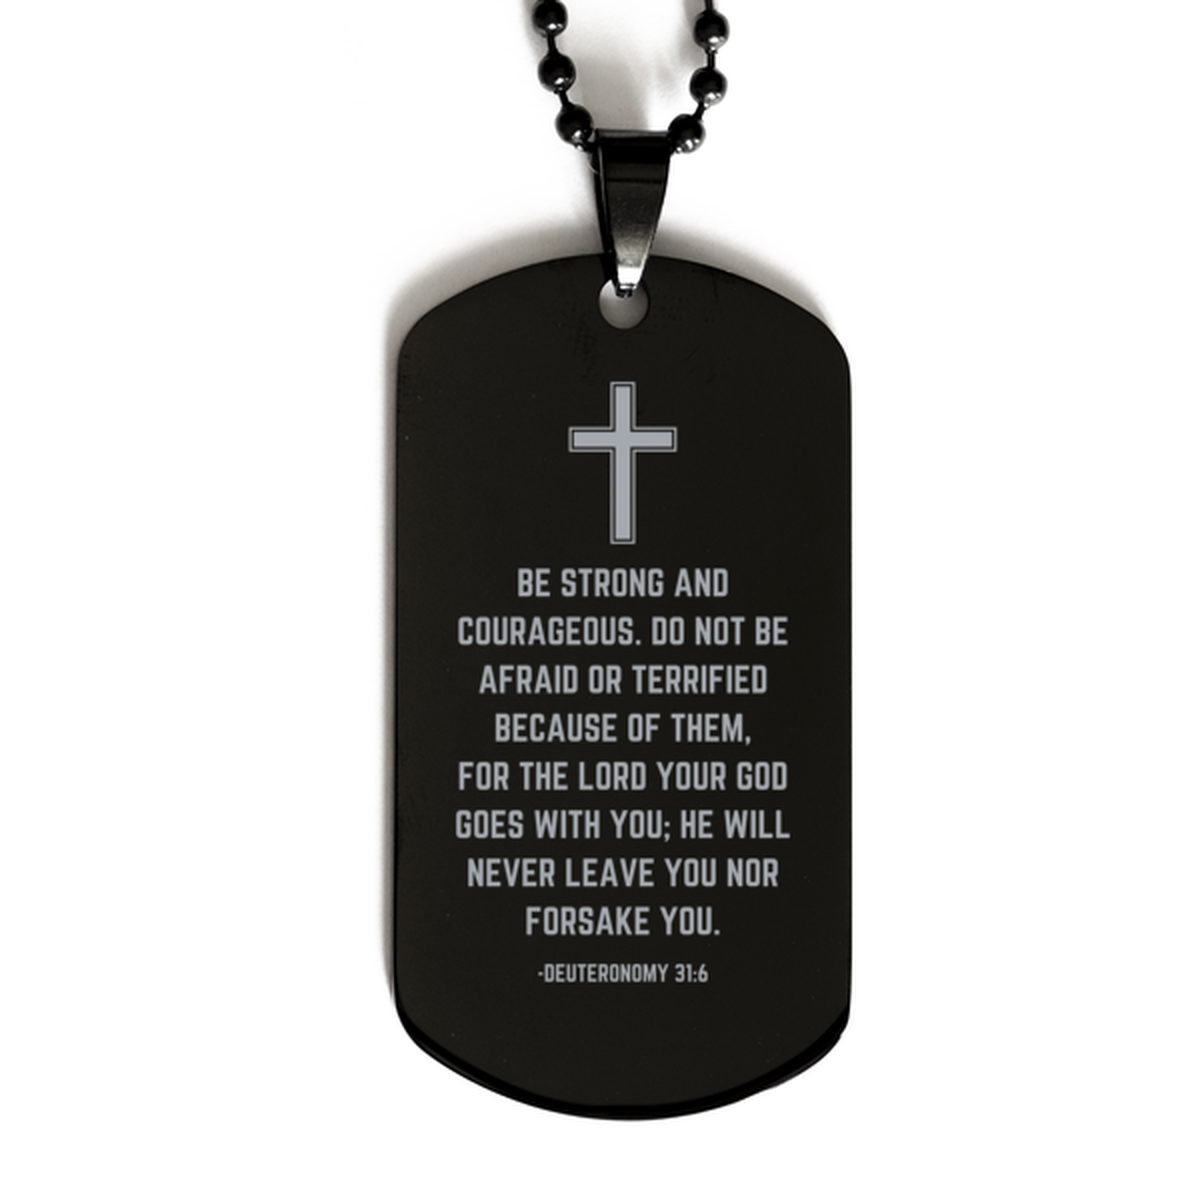 Baptism Gifts For Teenage Boys Girls, Christian Bible Verse Black Dog Tag, He will never leave you nor forsake you, Confirmation Gifts, Bible Verse Necklace for Son, Godson, Grandson, Nephew